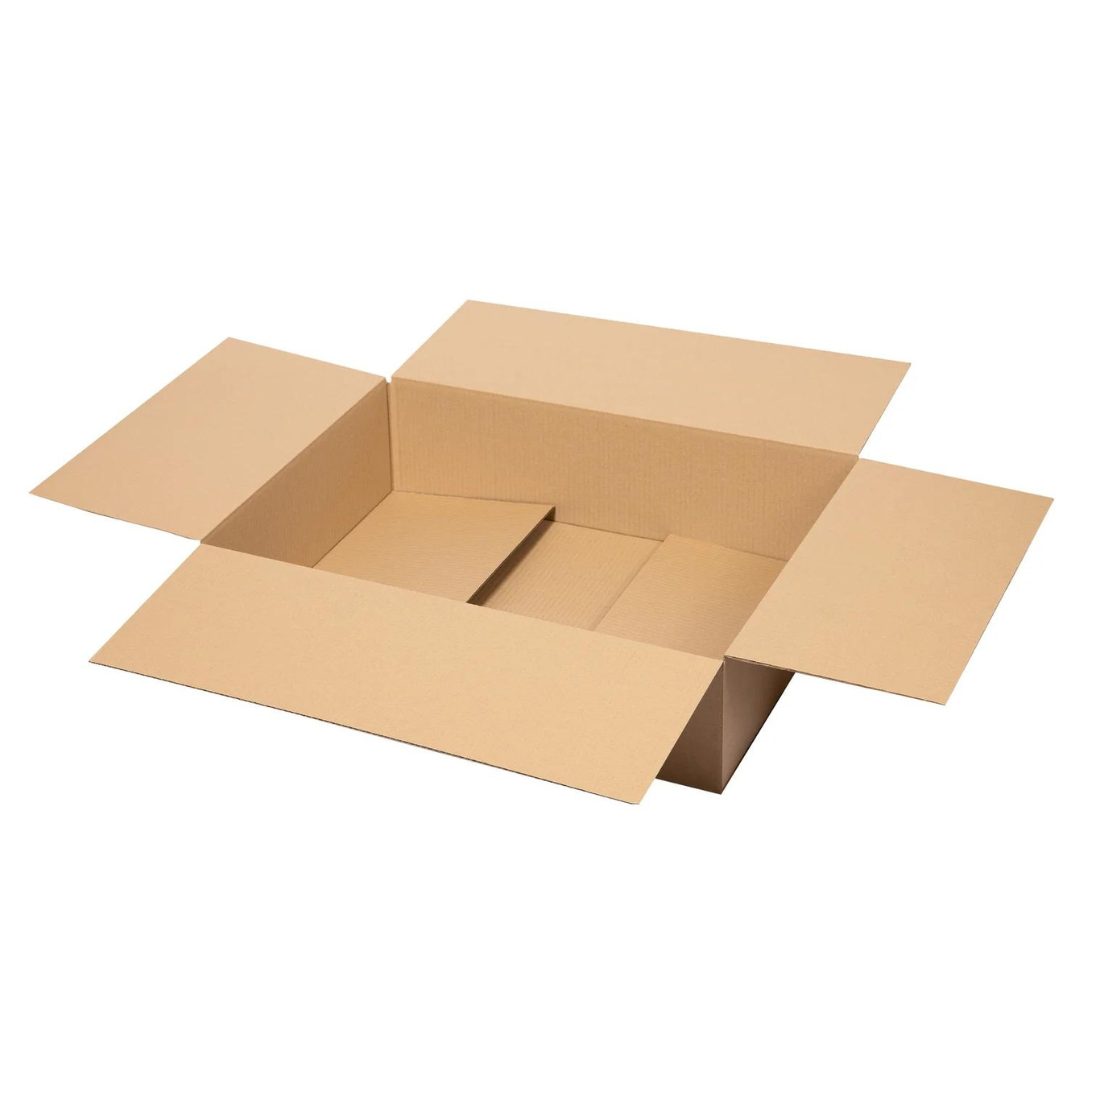 G30 Singled Walled Large Cardboard Boxes - fits 90% of all 2 slice toasters, juicers, Xbox and many other retail items (PACK OF 50)